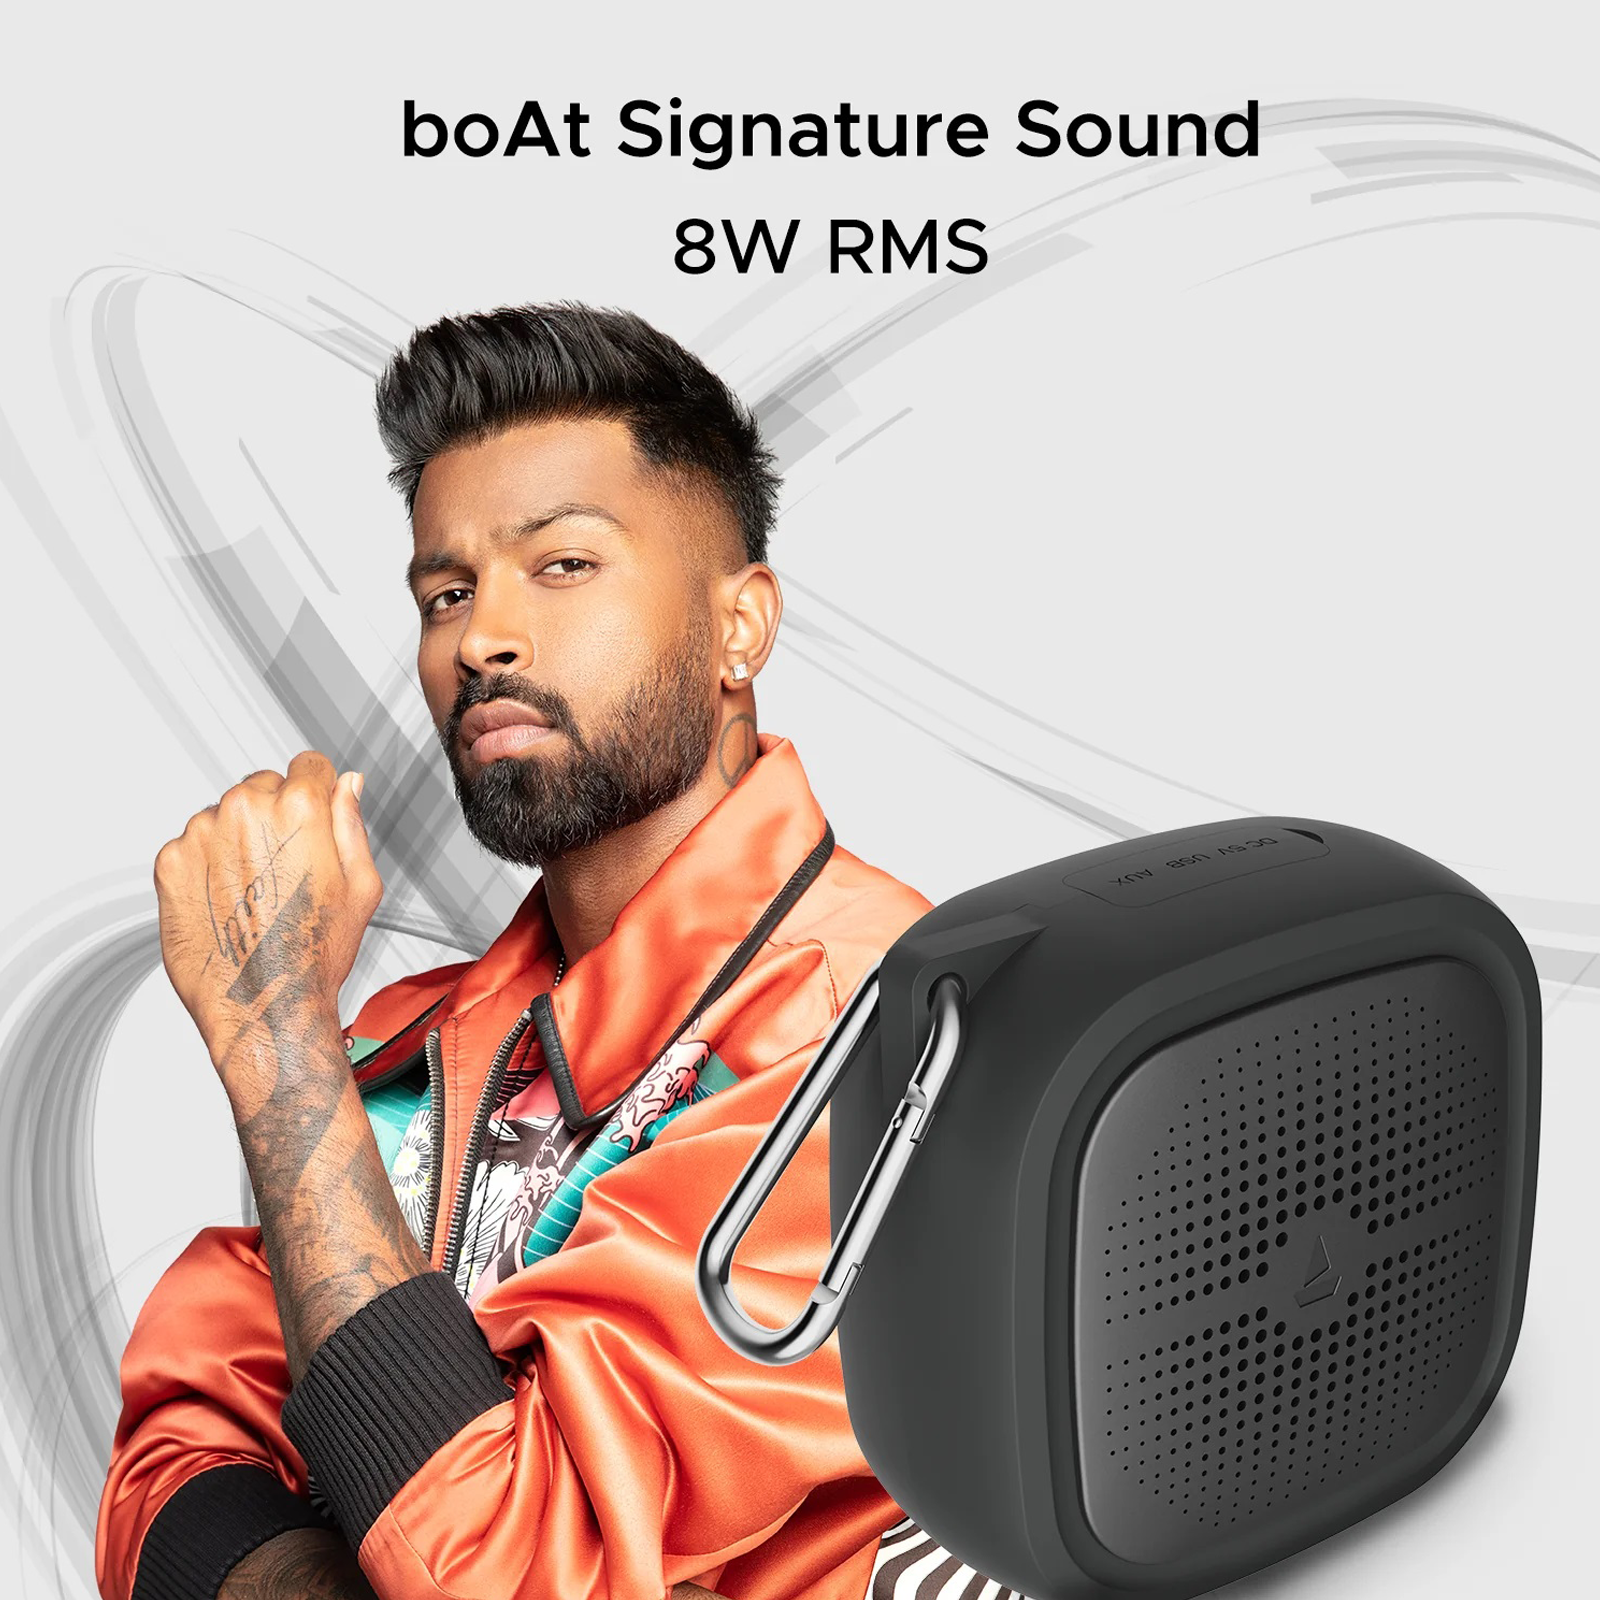 Boat Stone 200 Portable Bluetooth Speakers Blue 6714913.htm - Buy Boat  Stone 200 Portable Bluetooth Speakers Blue 6714913.htm online in India